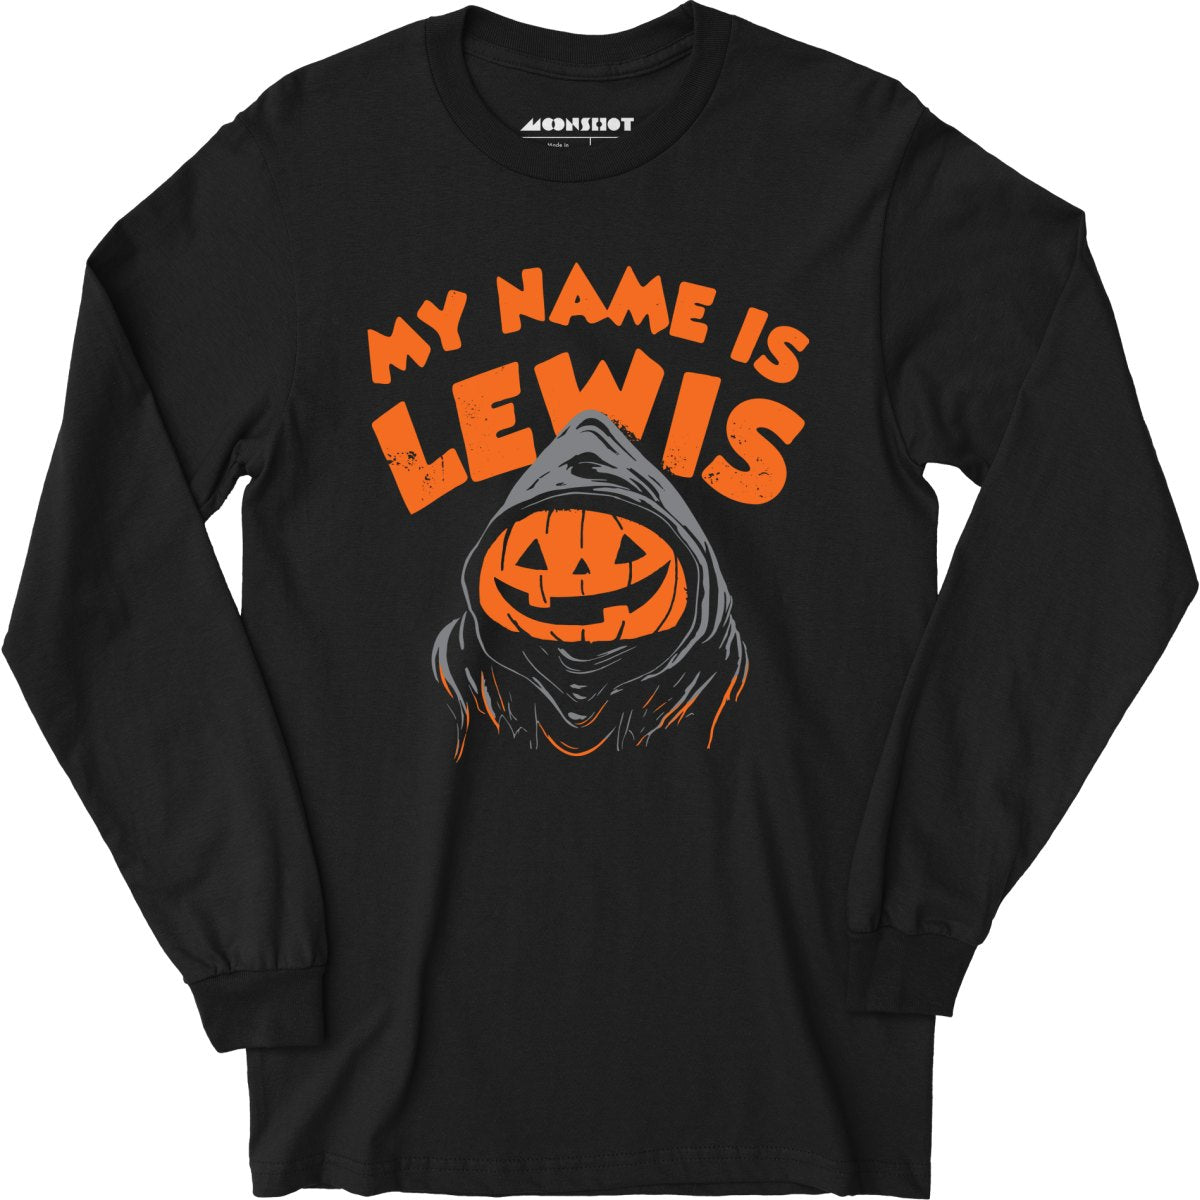 My Name is Lewis - Long Sleeve T-Shirt